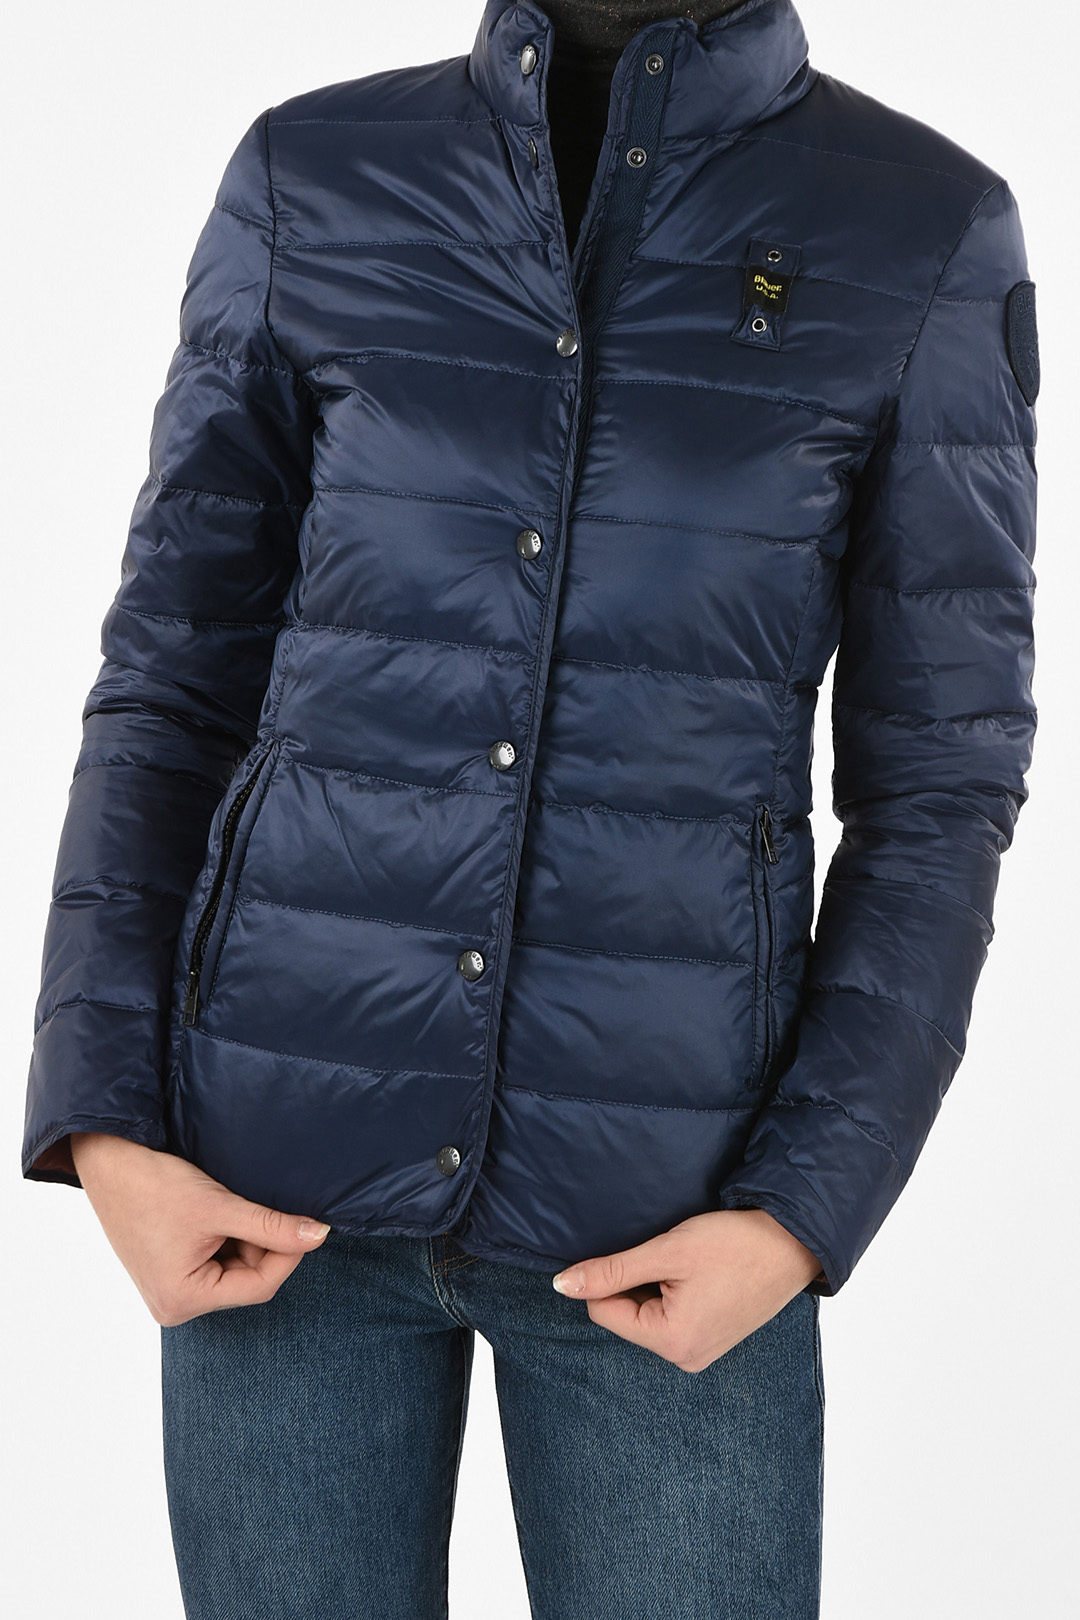 snap button down jacket women - Outlet